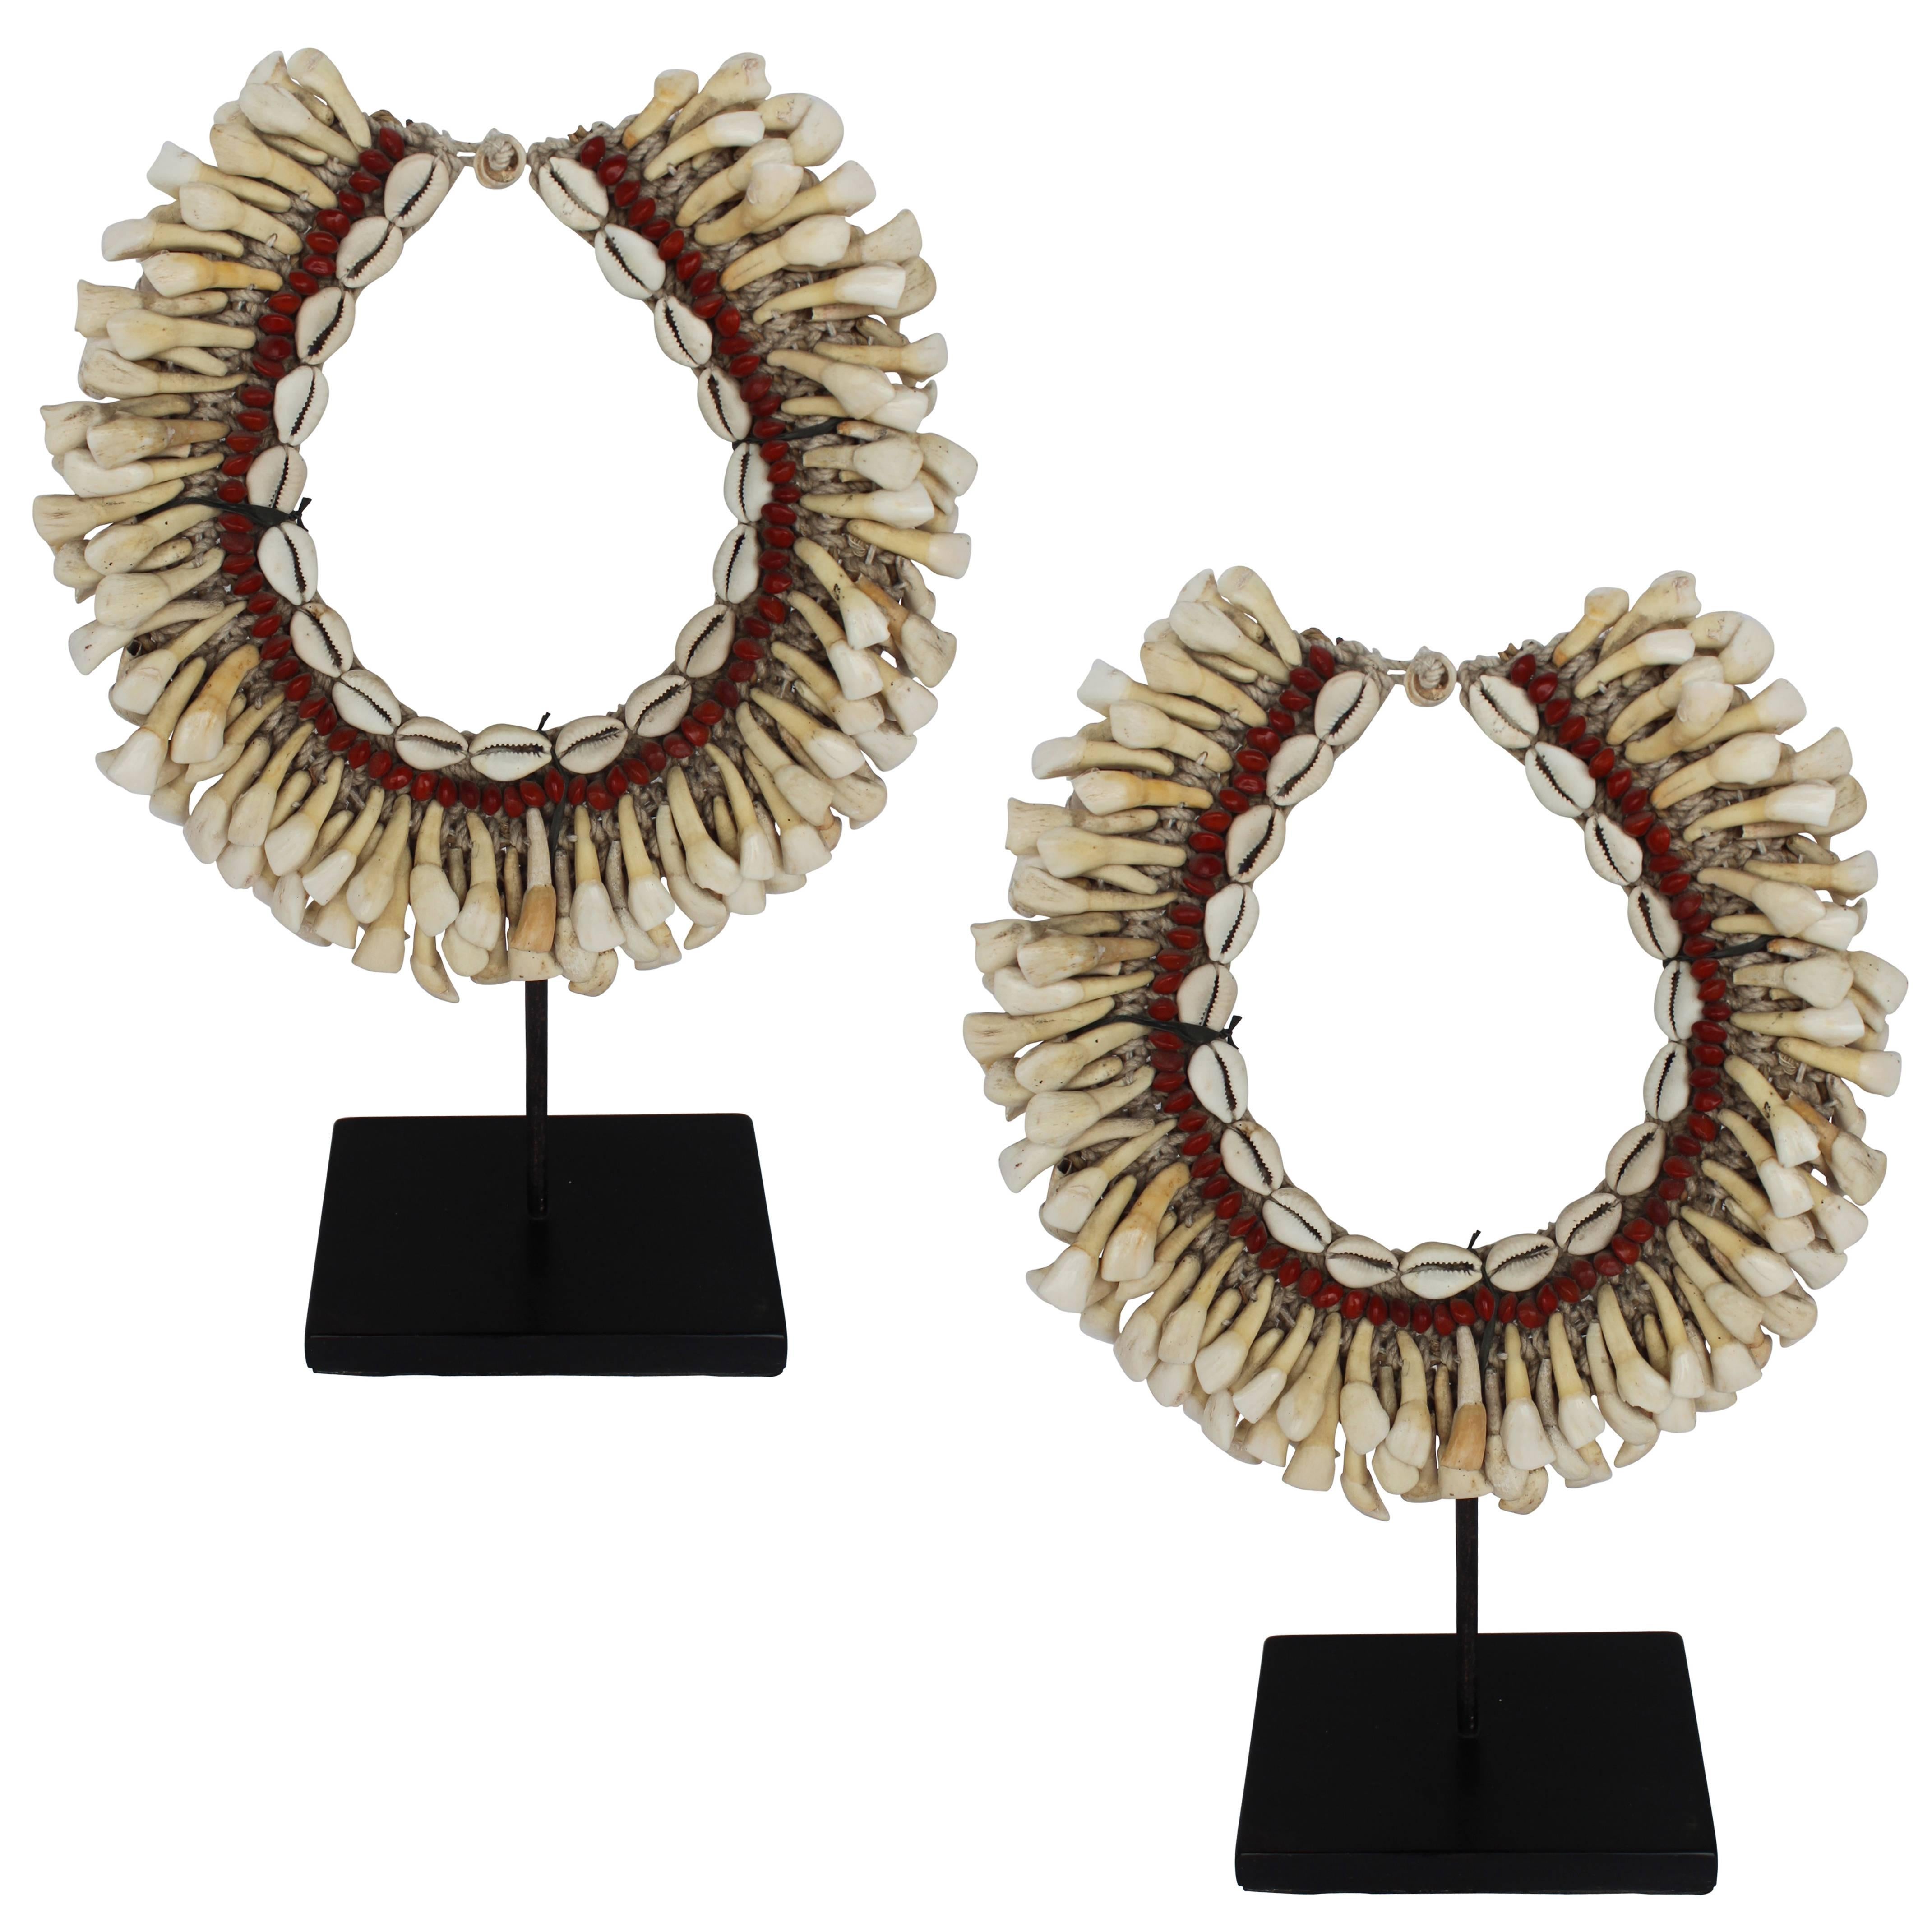 Tribal Teeth Necklaces on Stand